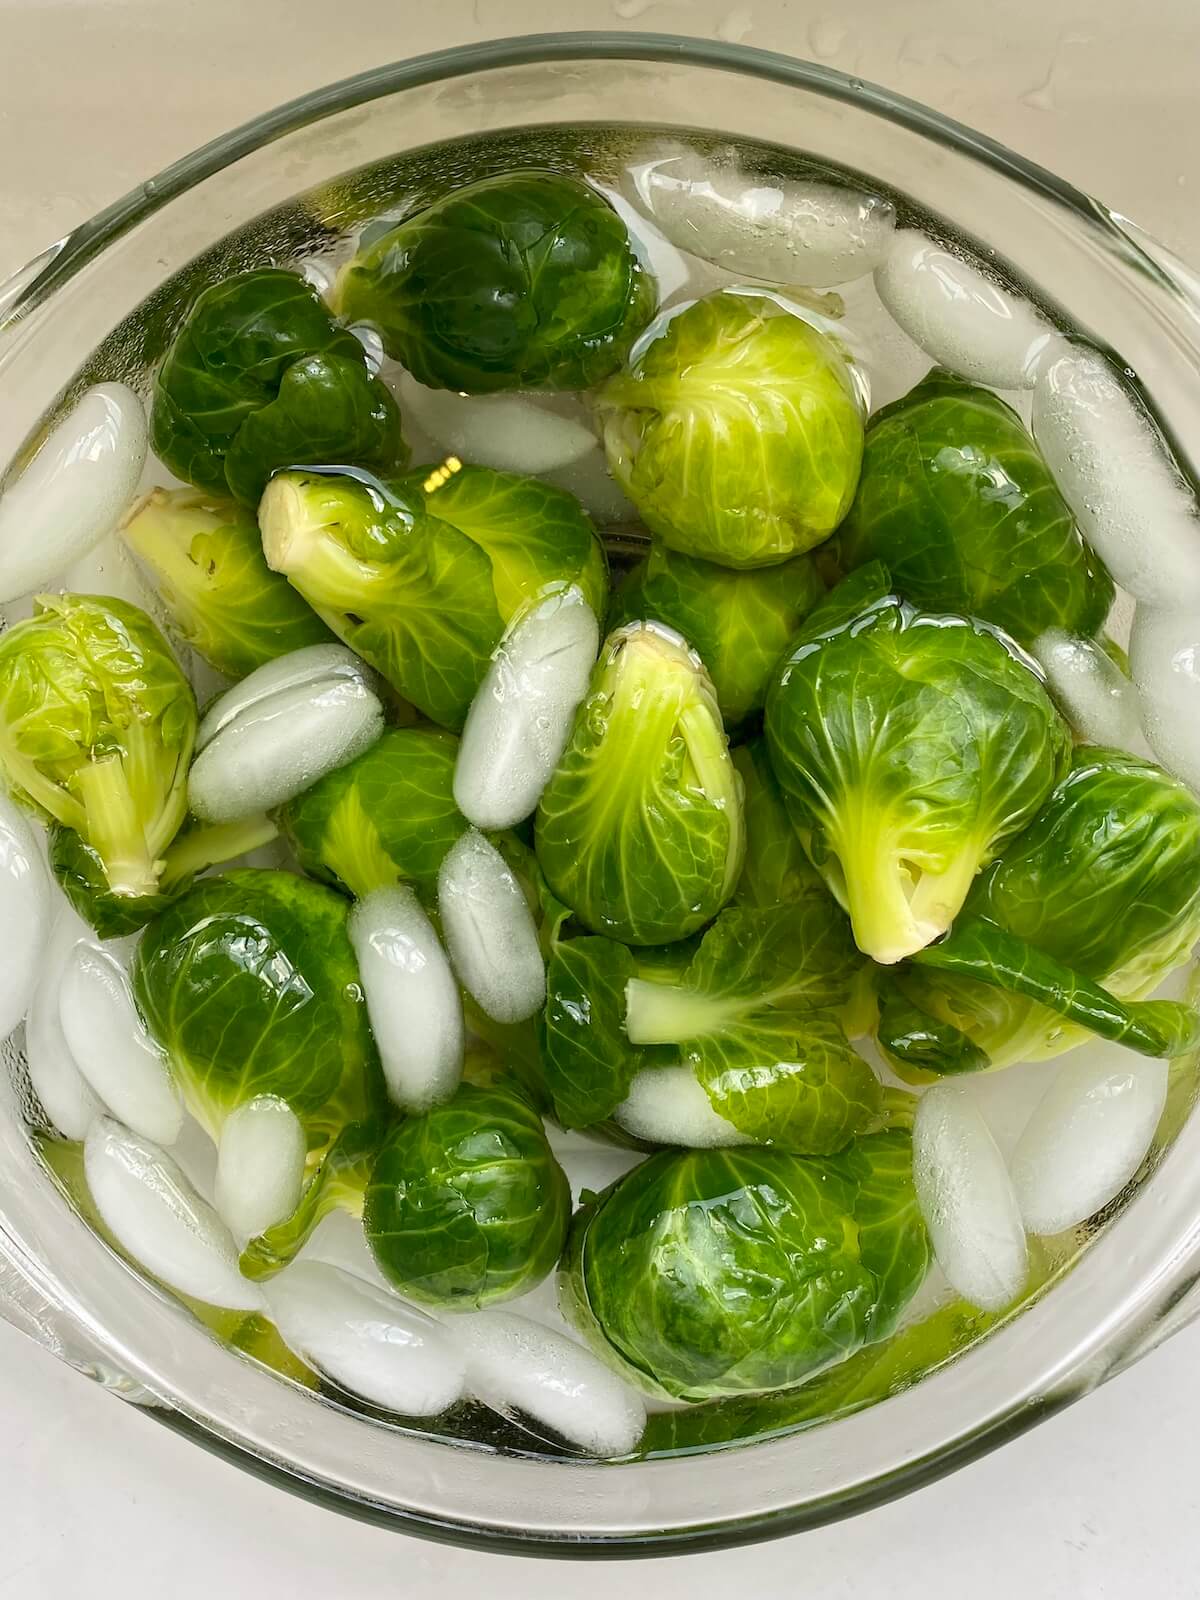 Blanched Brussels sprouts in a bowl of ice water.